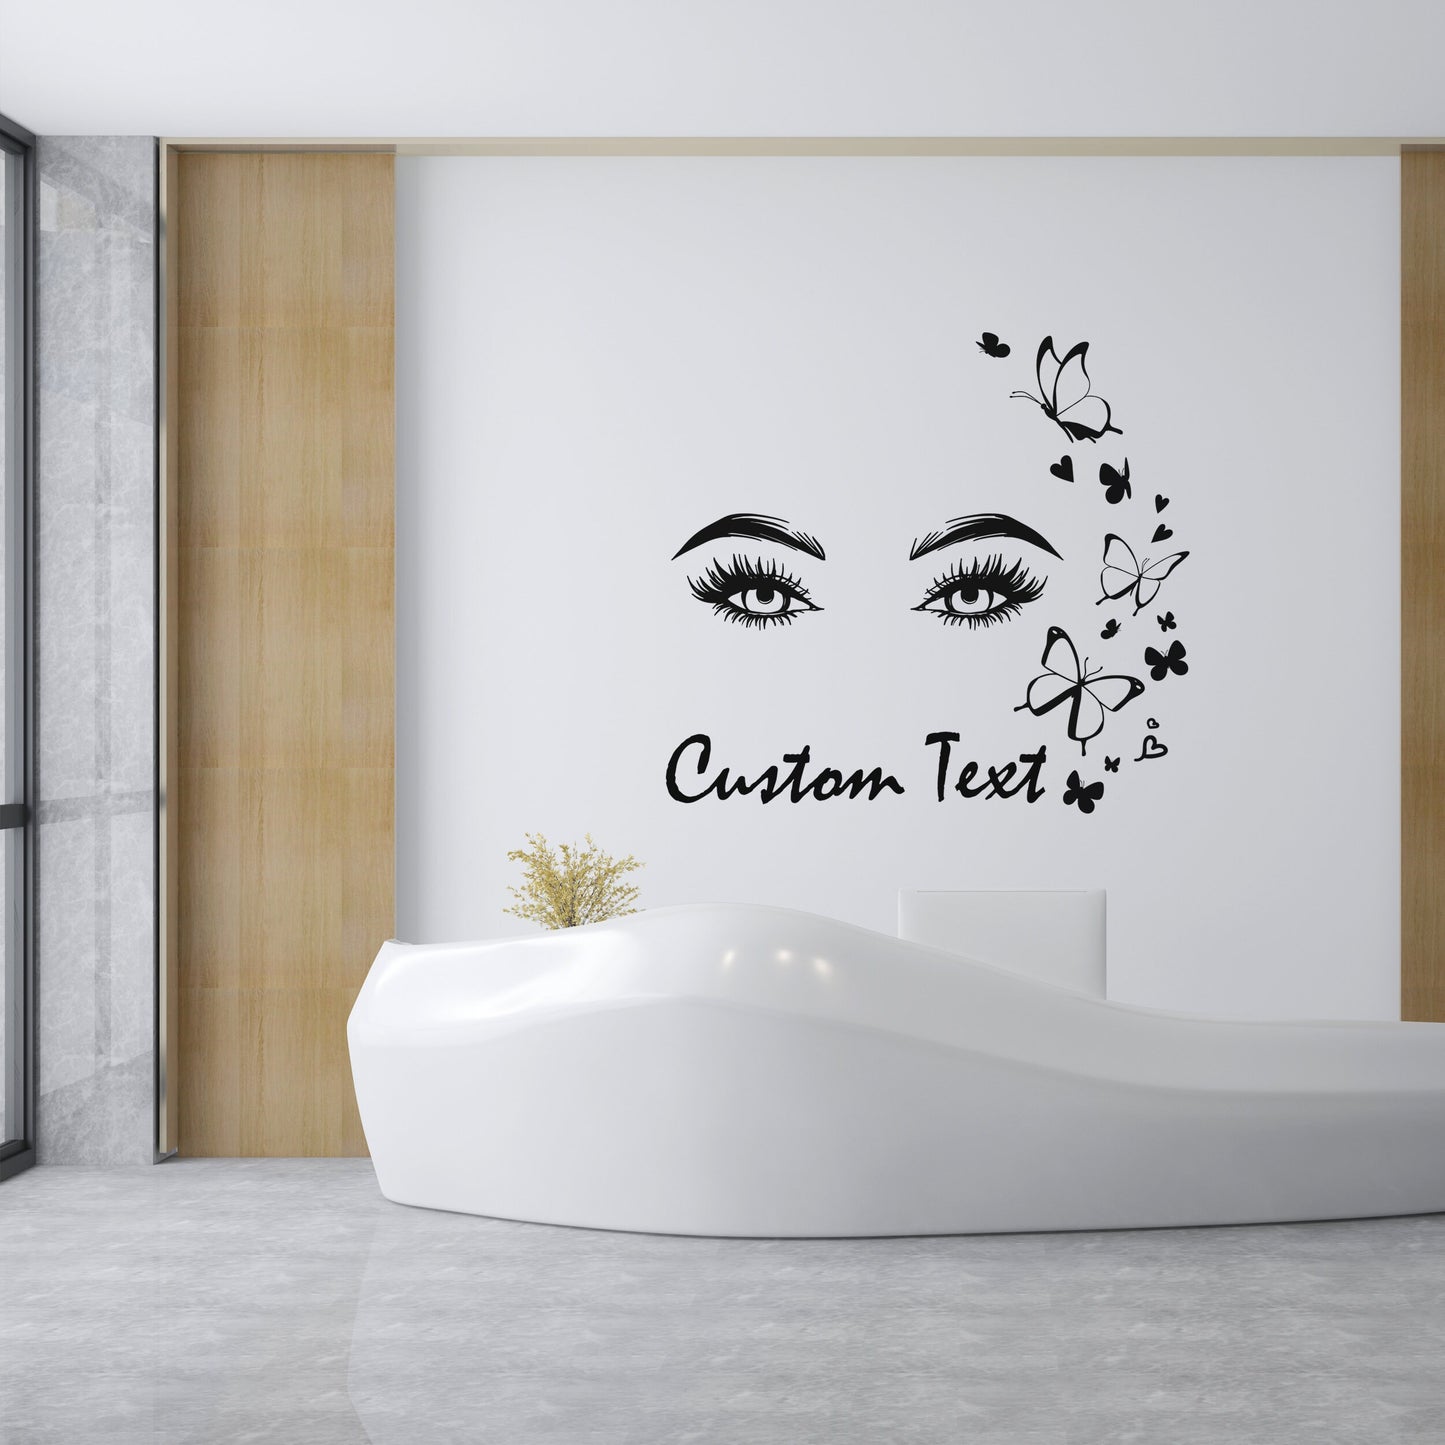 Beautiful Eyes with Eyebrows and Butterflies Wall Decal with Custom Your Own Text - Wall Decal for Girls Room, Women's Room, Makeup Area